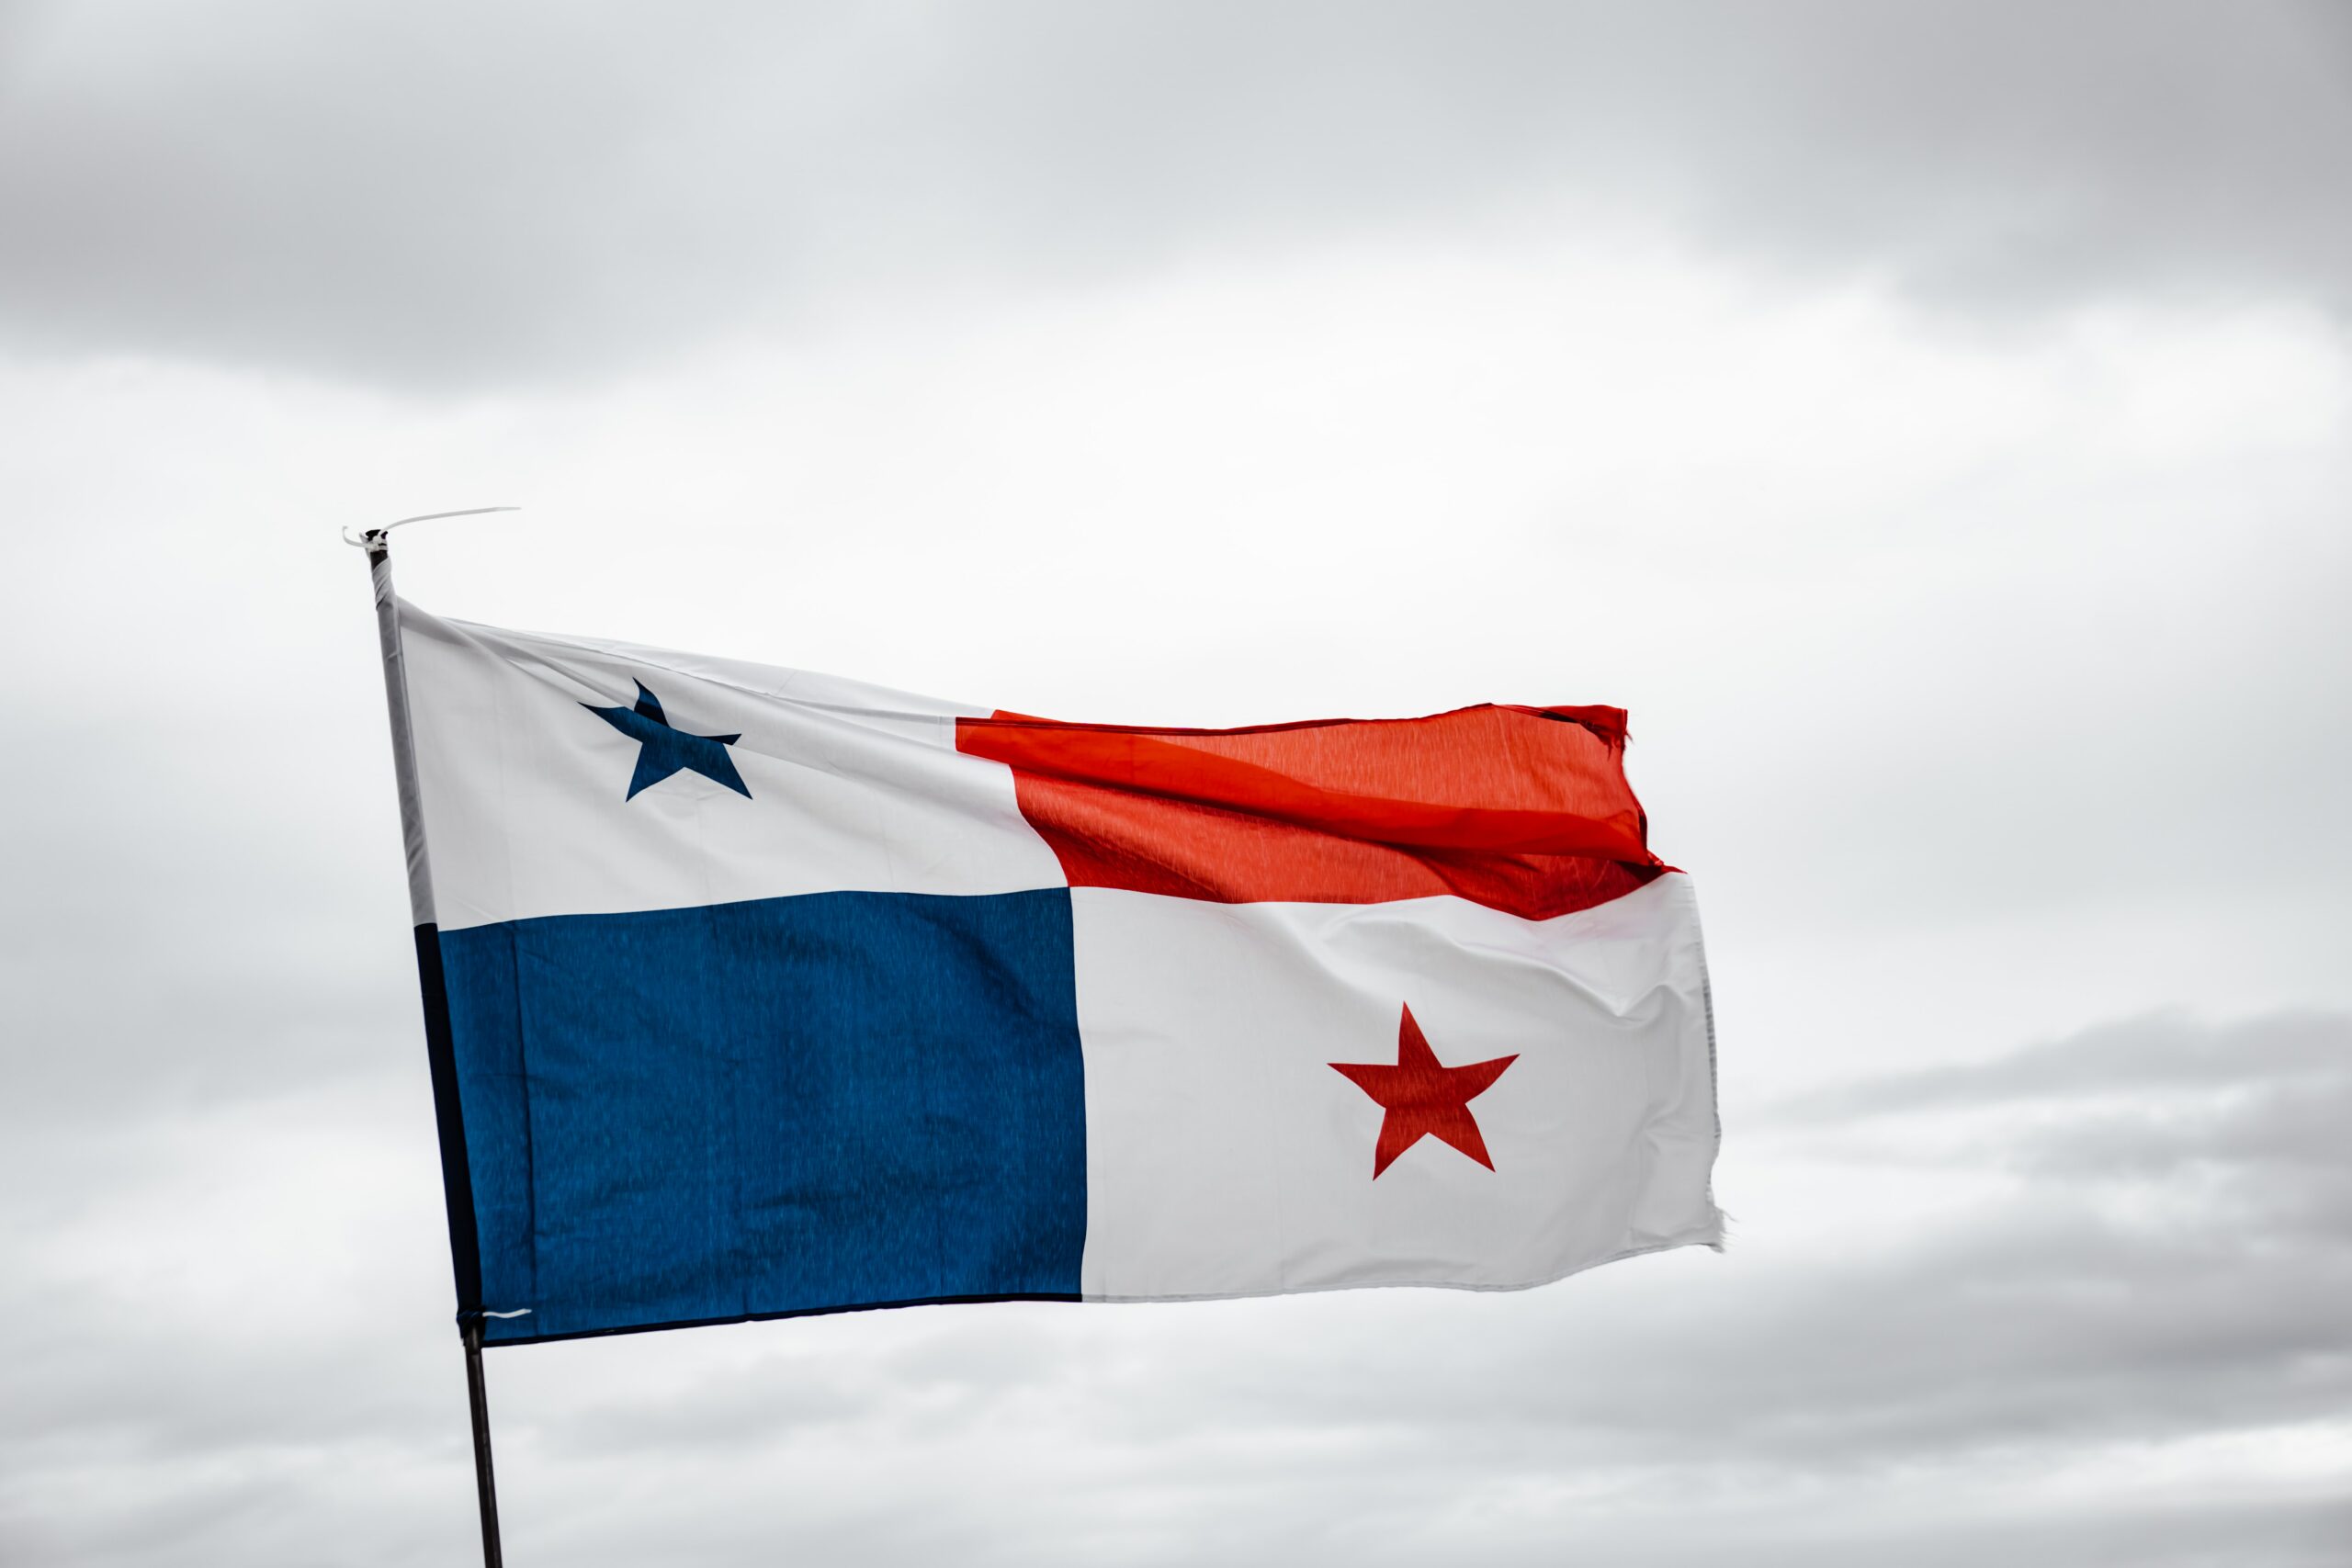 A Panama flag flying on a cloudy day